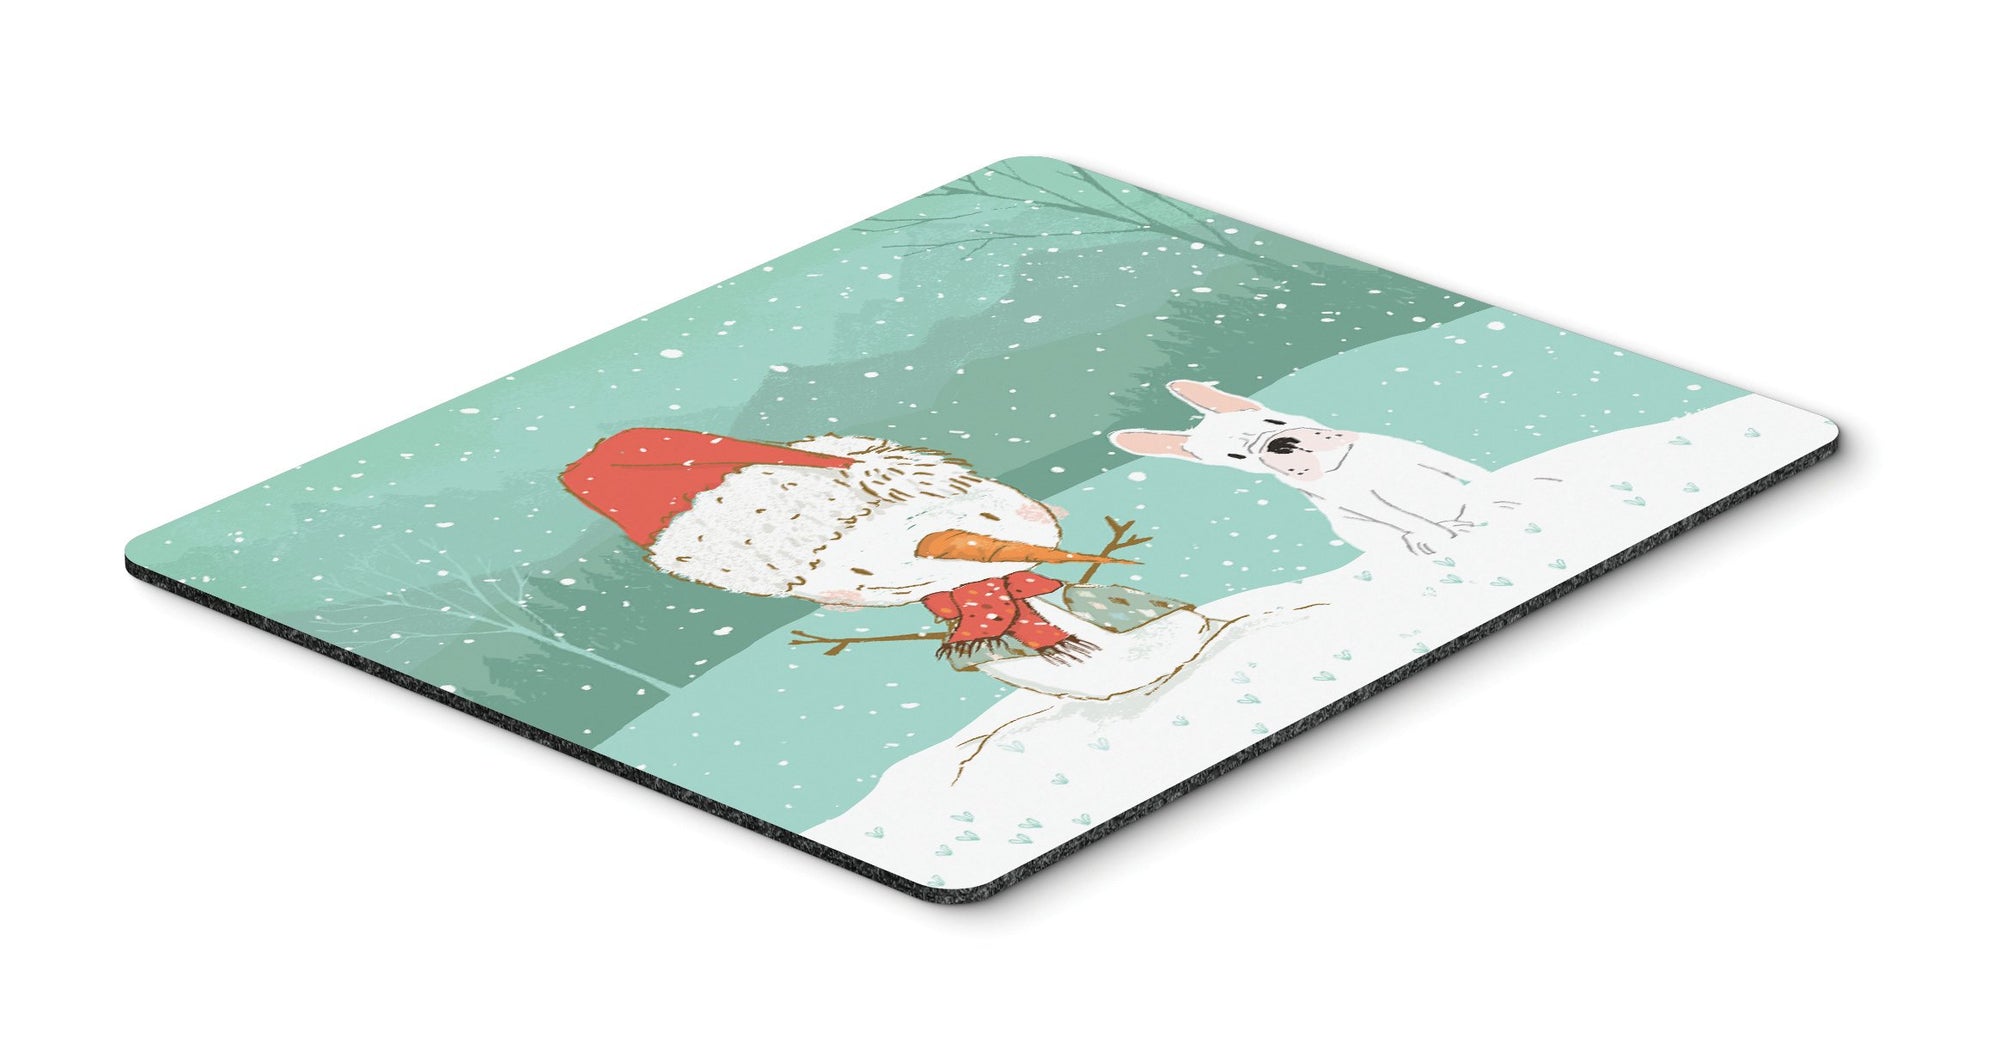 White French Bulldog Snowman Christmas Mouse Pad, Hot Pad or Trivet CK2088MP by Caroline's Treasures